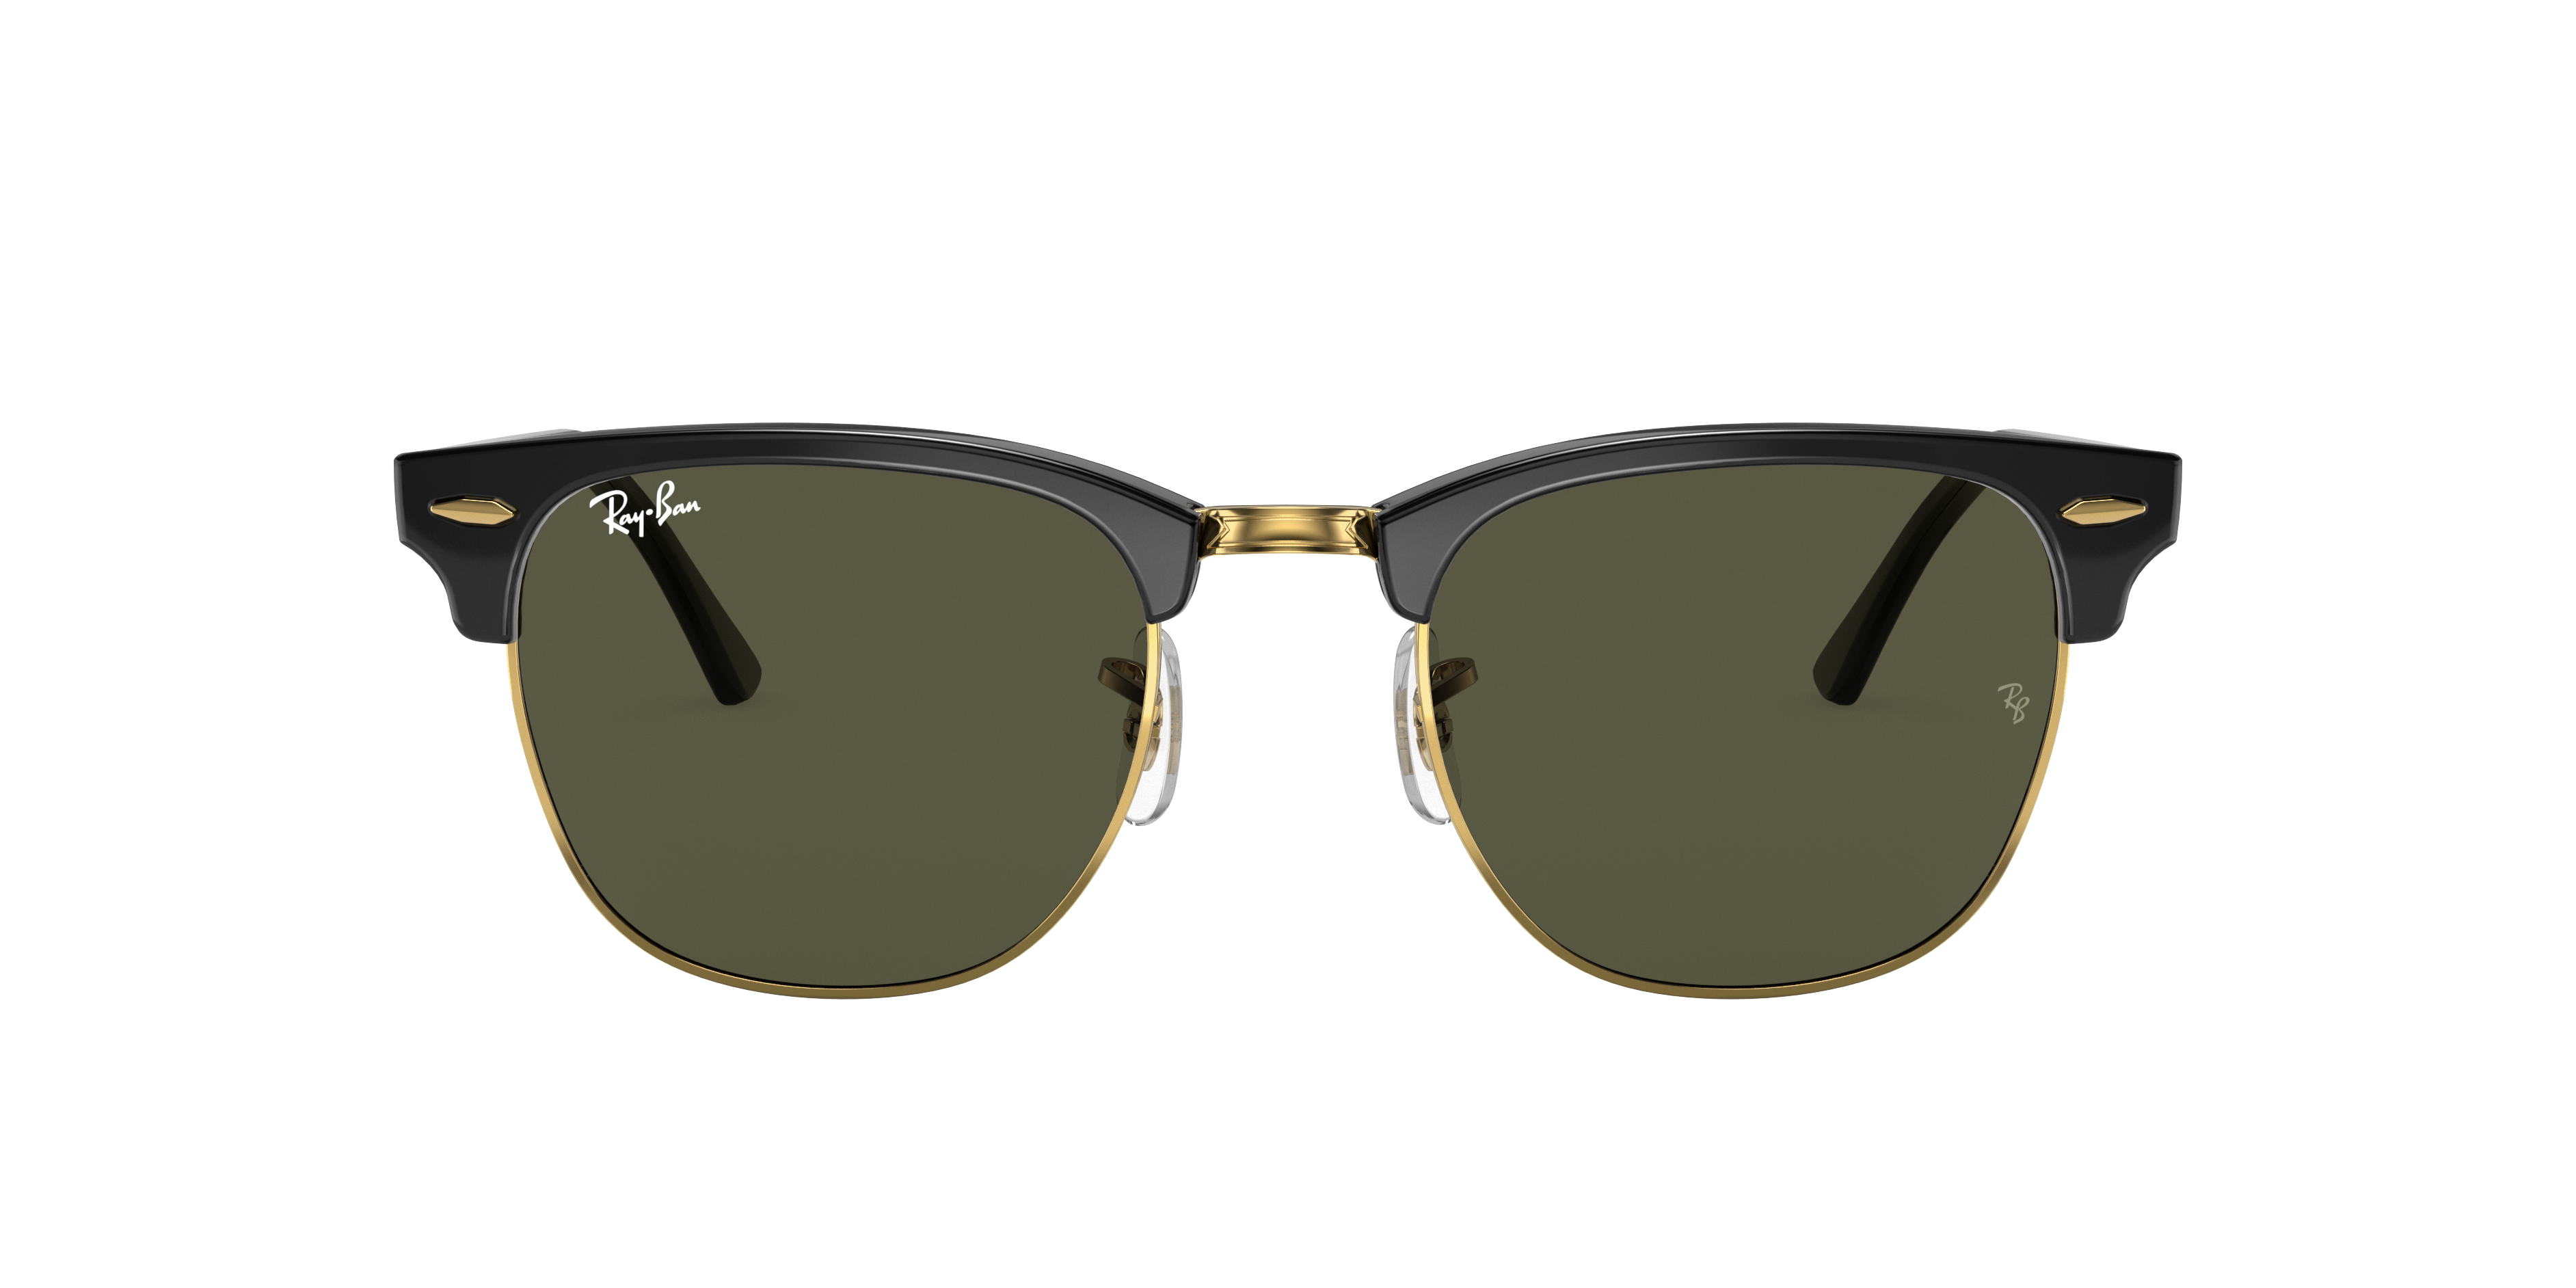 Ray Ban Green Tinted Clubmaster Sunglasses S35A5588 @ ₹7798